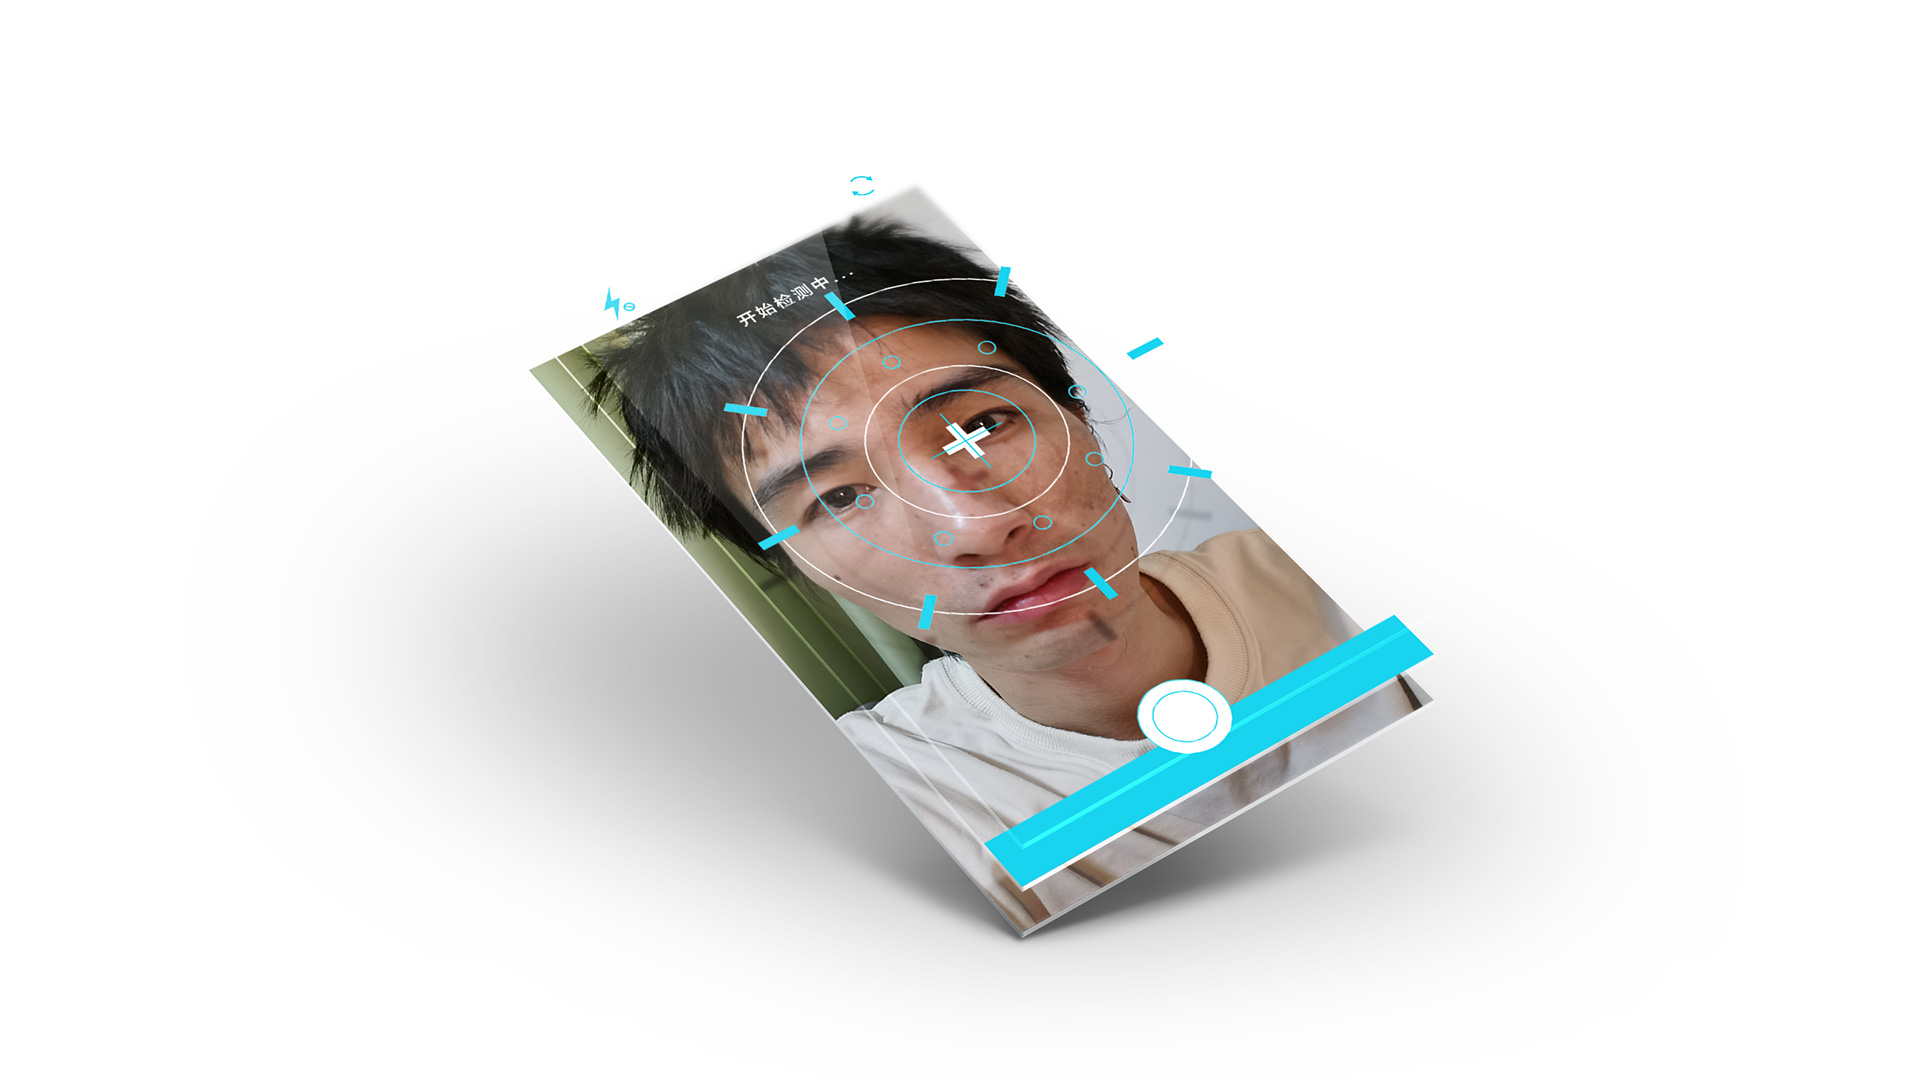 one app screen shoot. The interface is that people use HEEK's front camera to detect skin.